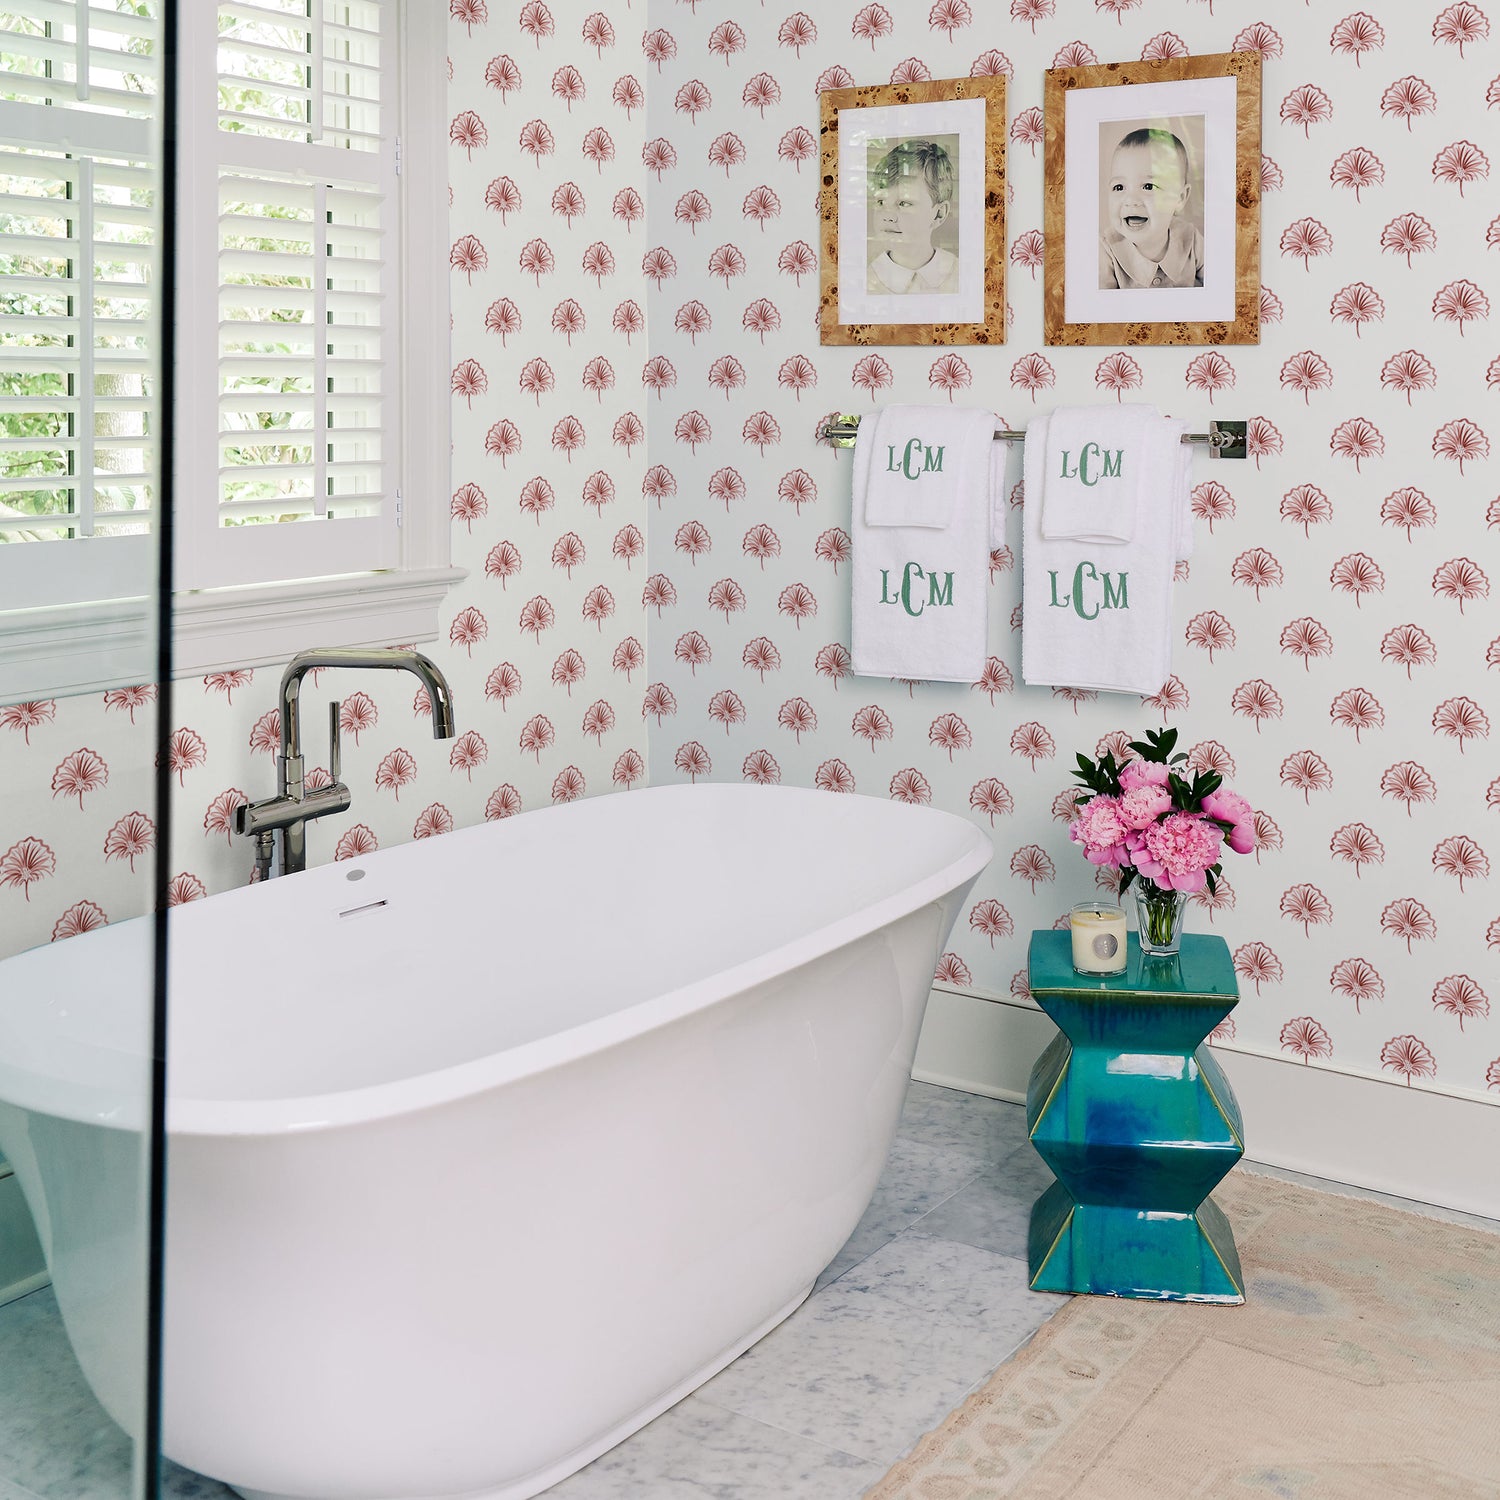 Bathroom styled with Rose Floral printed wallpaper with white bath tub and two photo frames hanging from wall on top of the hanging monogrammed towels